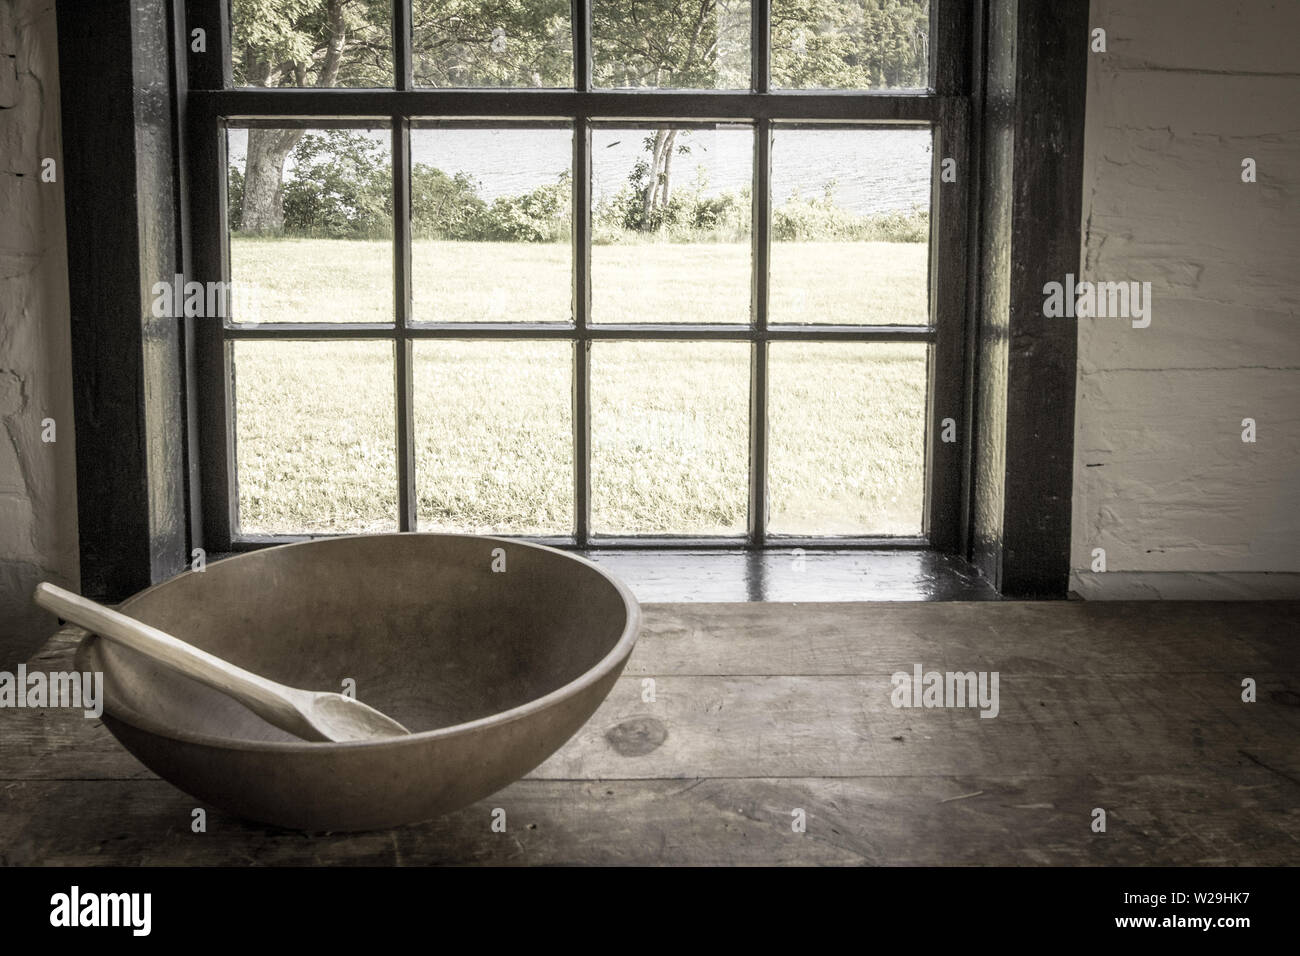 Country Kitchen Interior. Rustic style kitchen with wooden spoon and bowl on antique wooden table Stock Photo